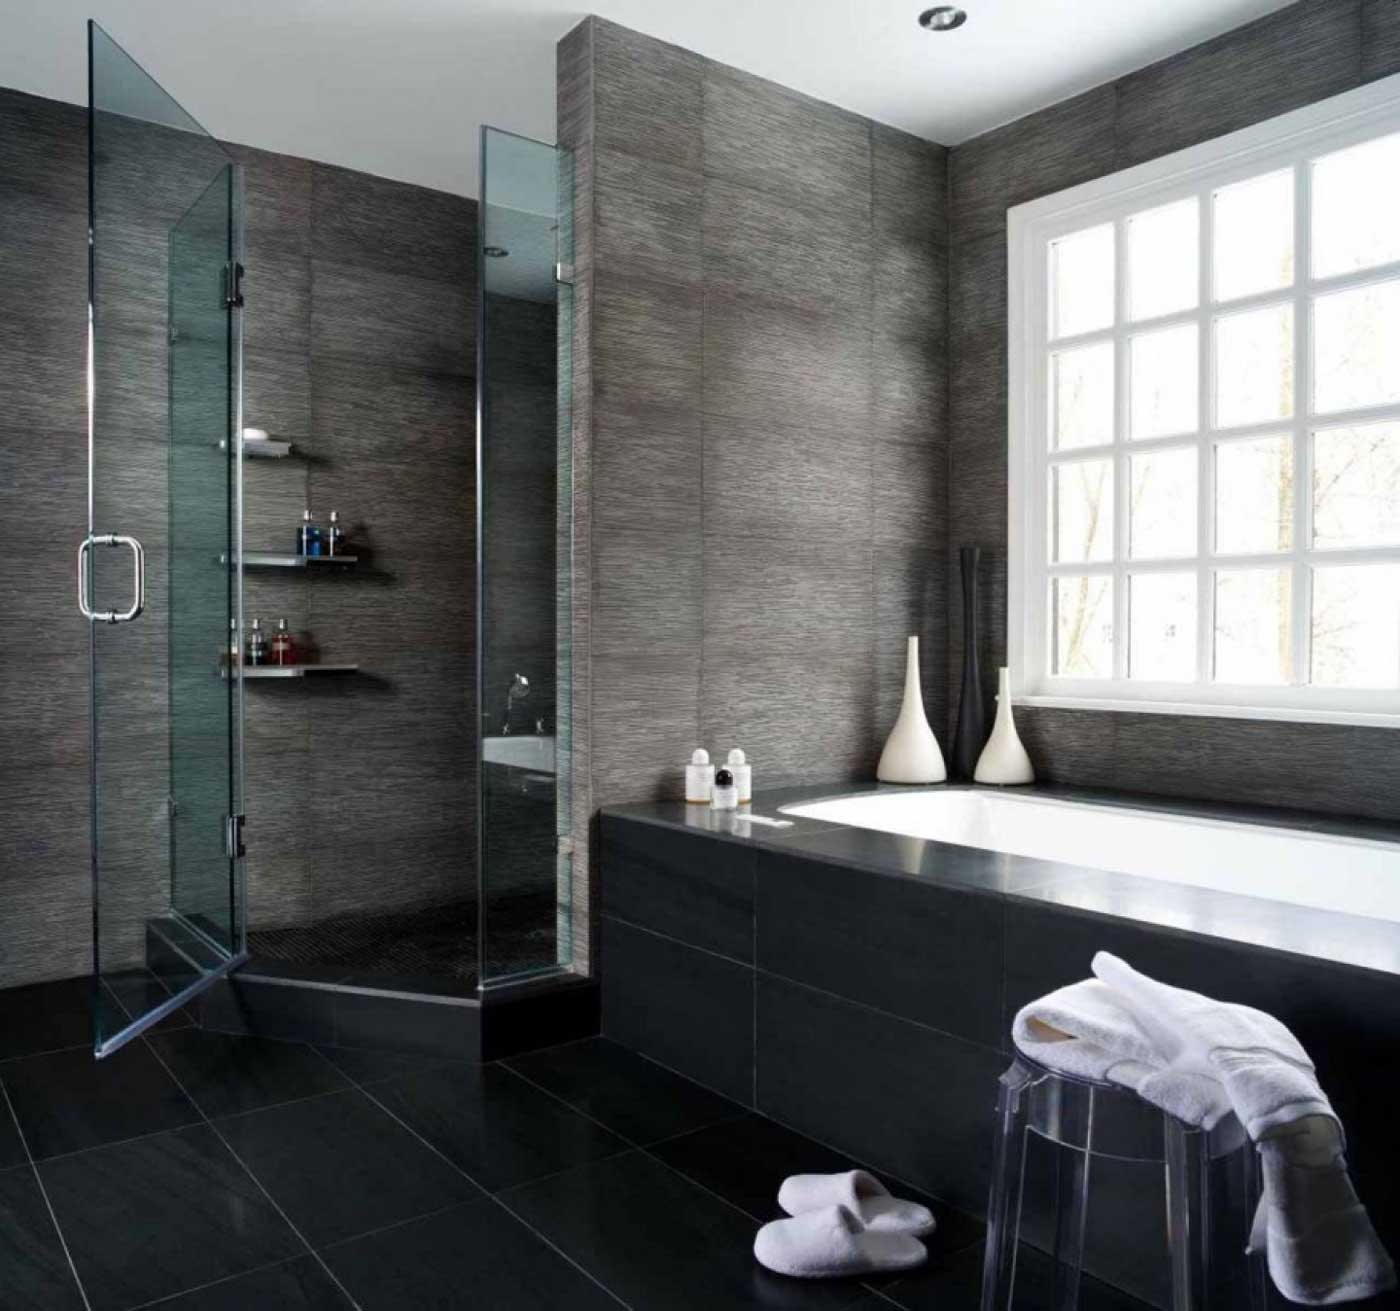 And Black Bathrooms Gray And Black Color Schemed Bathrooms Decorating Ideas For Home Office With Modern Black Ceramic Floor Design And White Ellipse Bathtub Design Also Glass Shower Doors For Small Bathrooms Idea Bathroom The Most Comfortable Bathroom Decorating Ideas